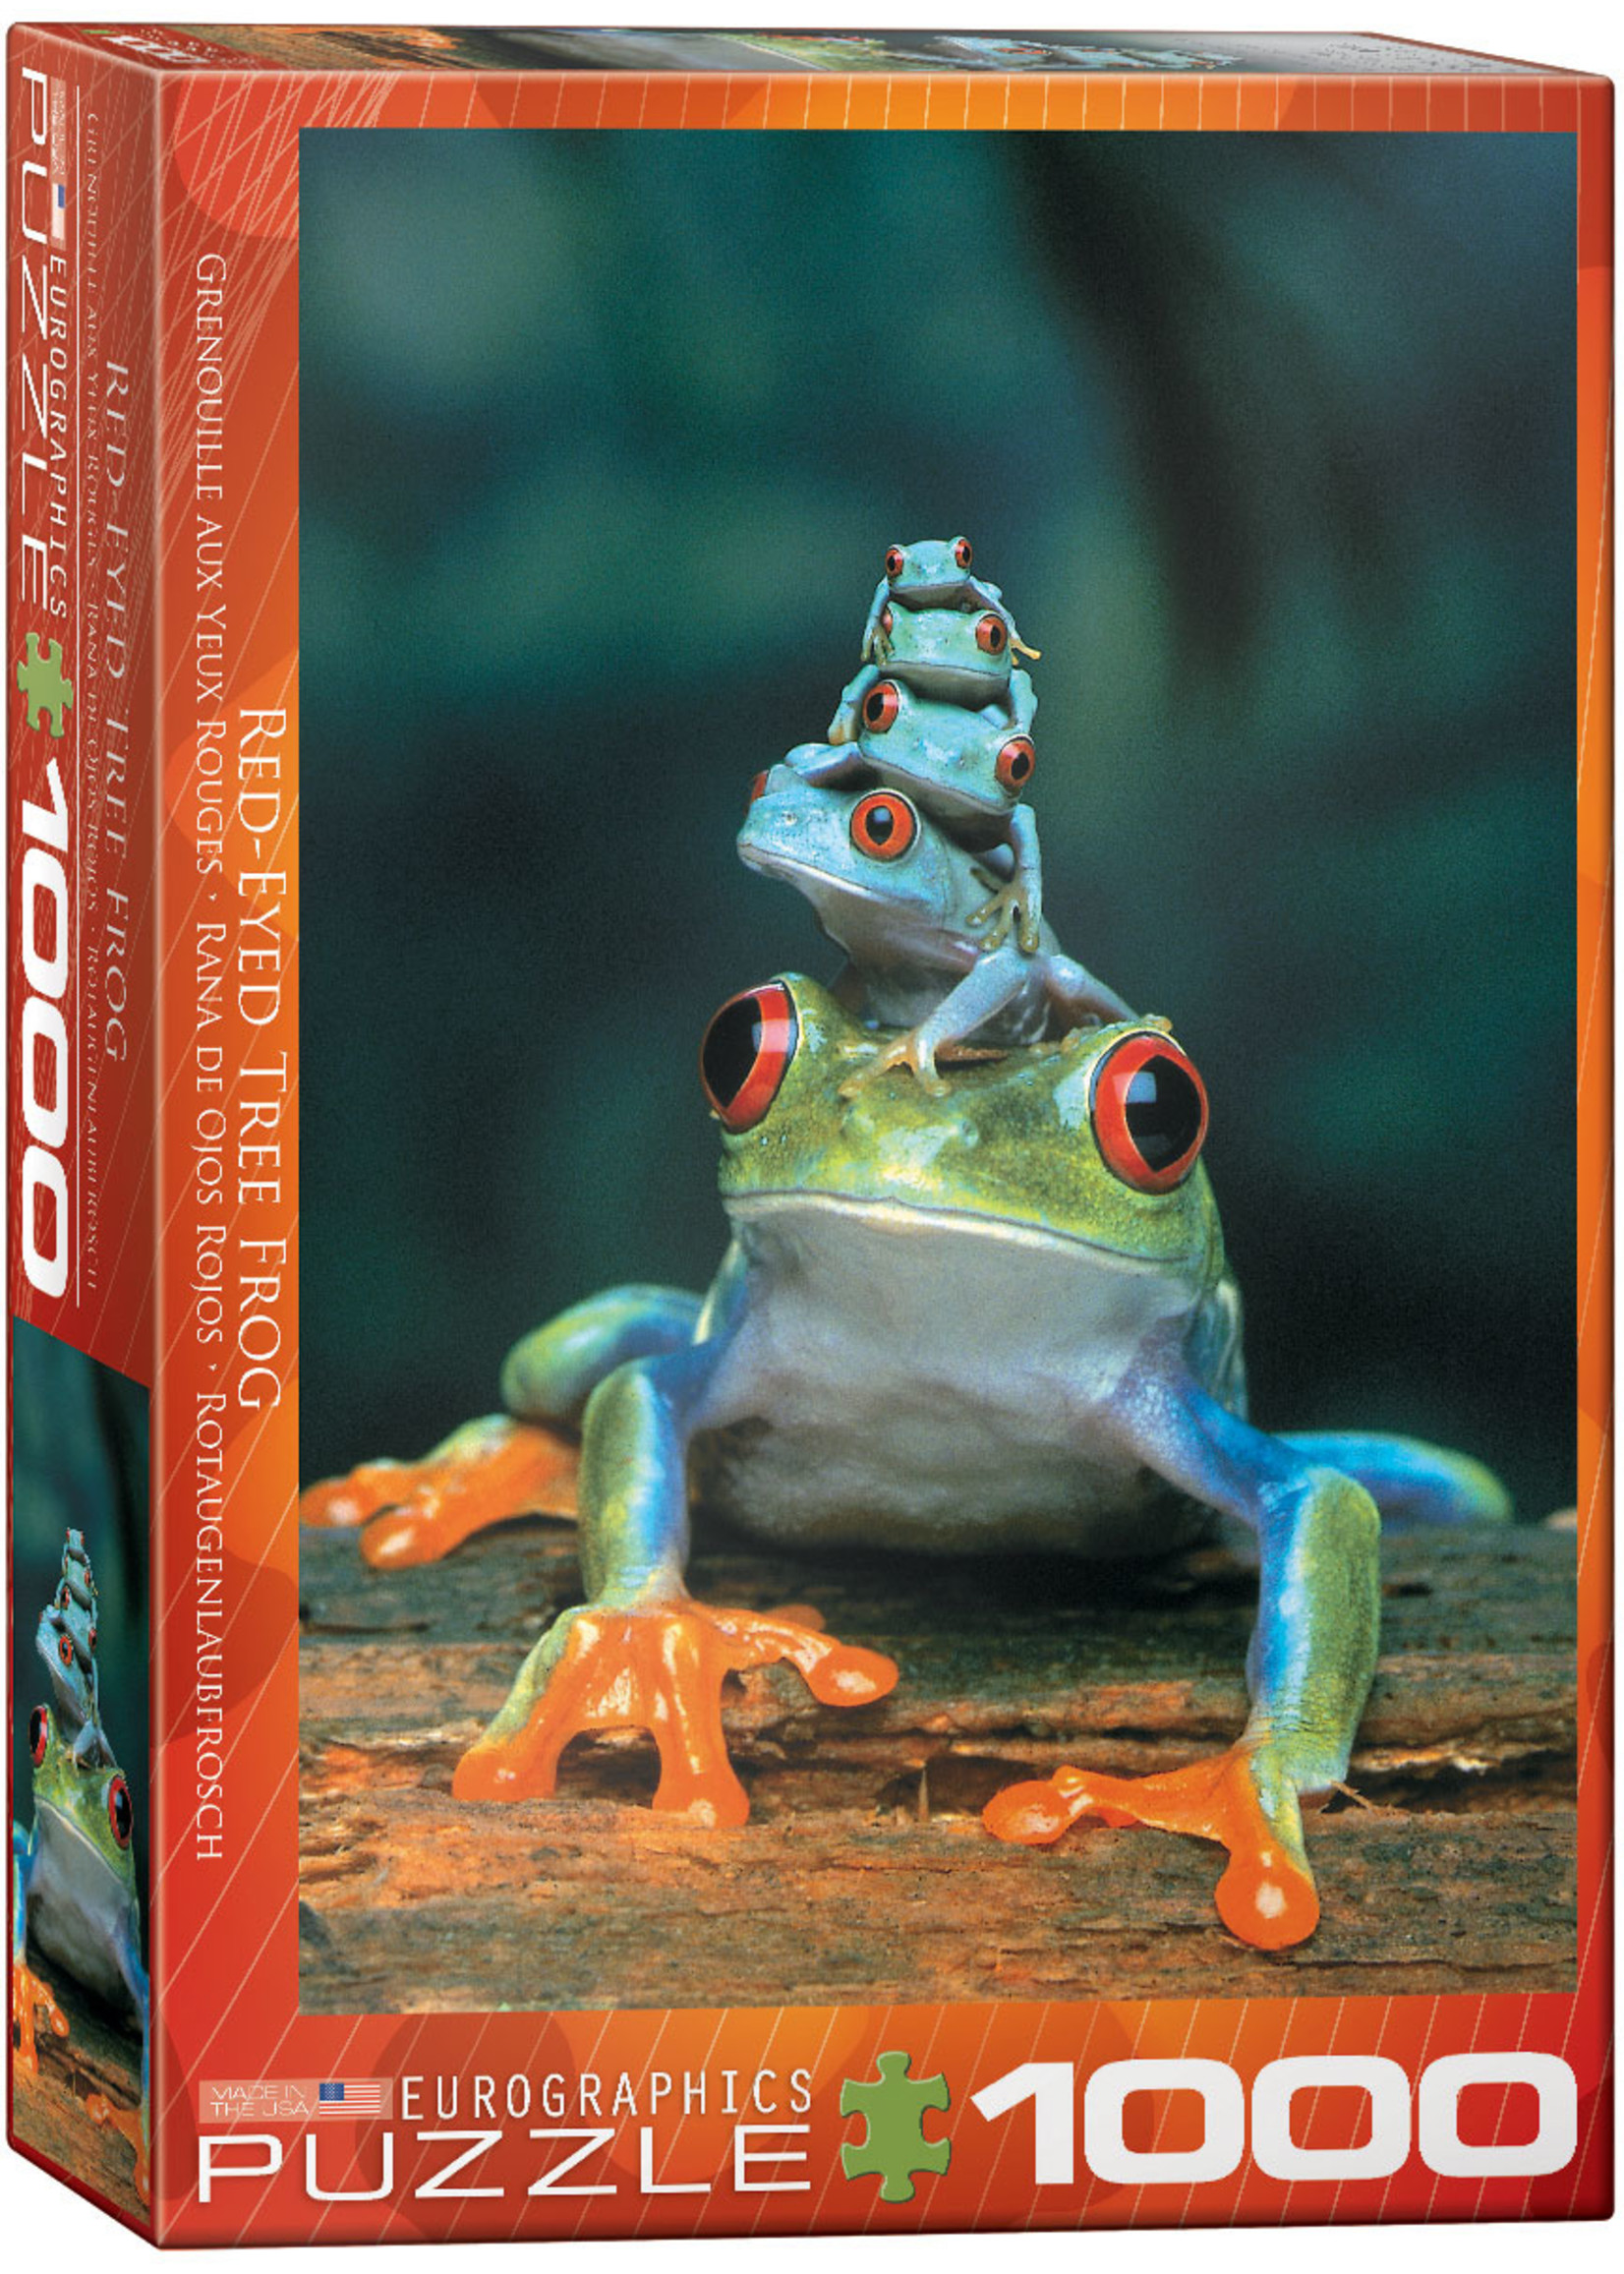 Eurographics "Red-Eyed Tree Frog" 1000 Piece Puzzle